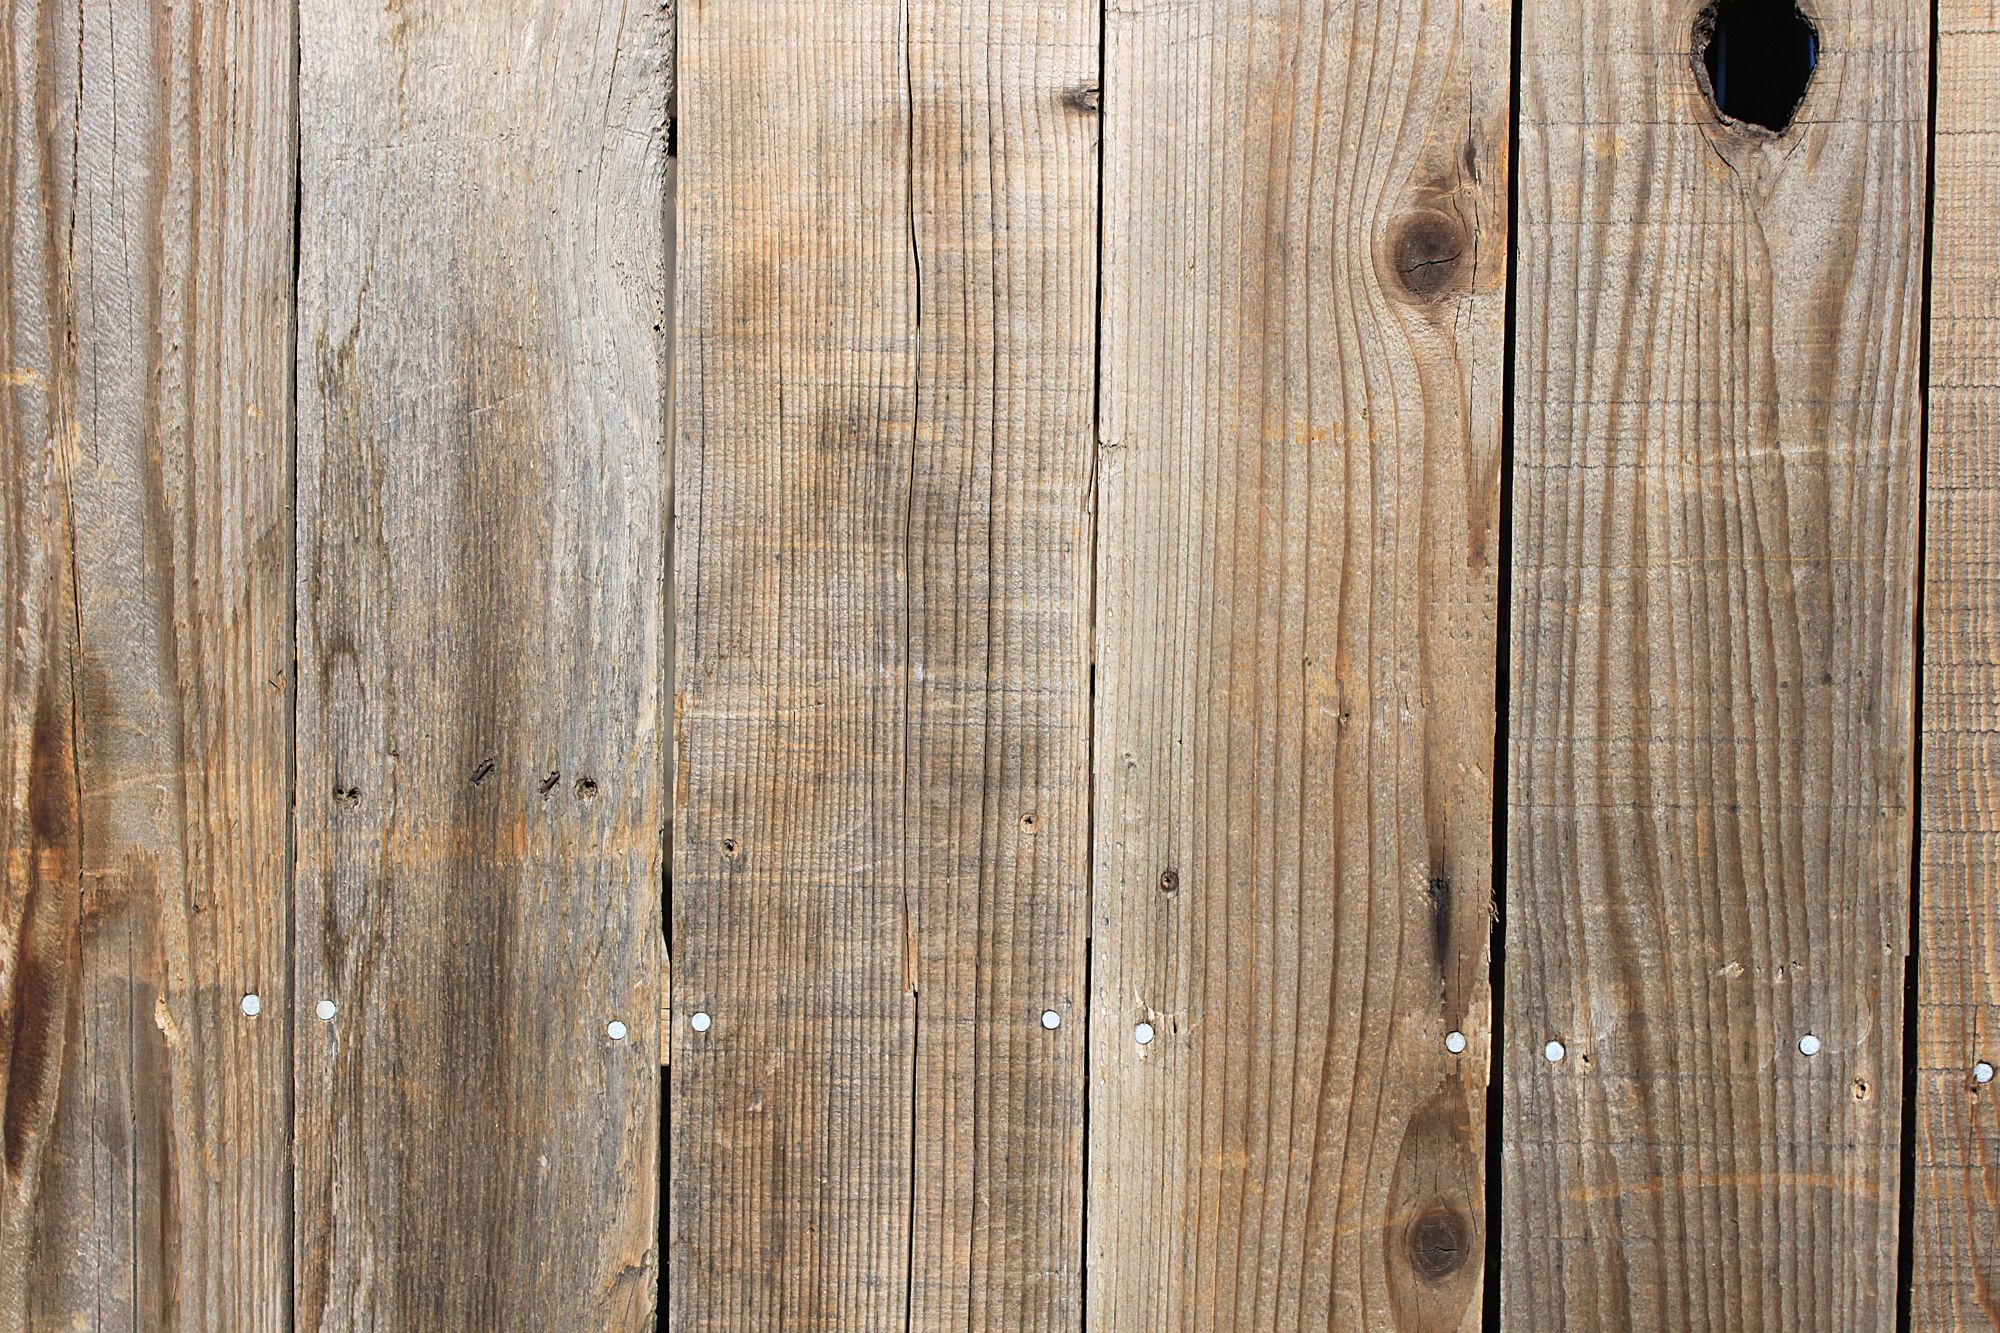 Totally FREE High Res Rustic Wooden Textures and Graphic Elements. Rustic wood wallpaper, Rustic wood background, Rustic background